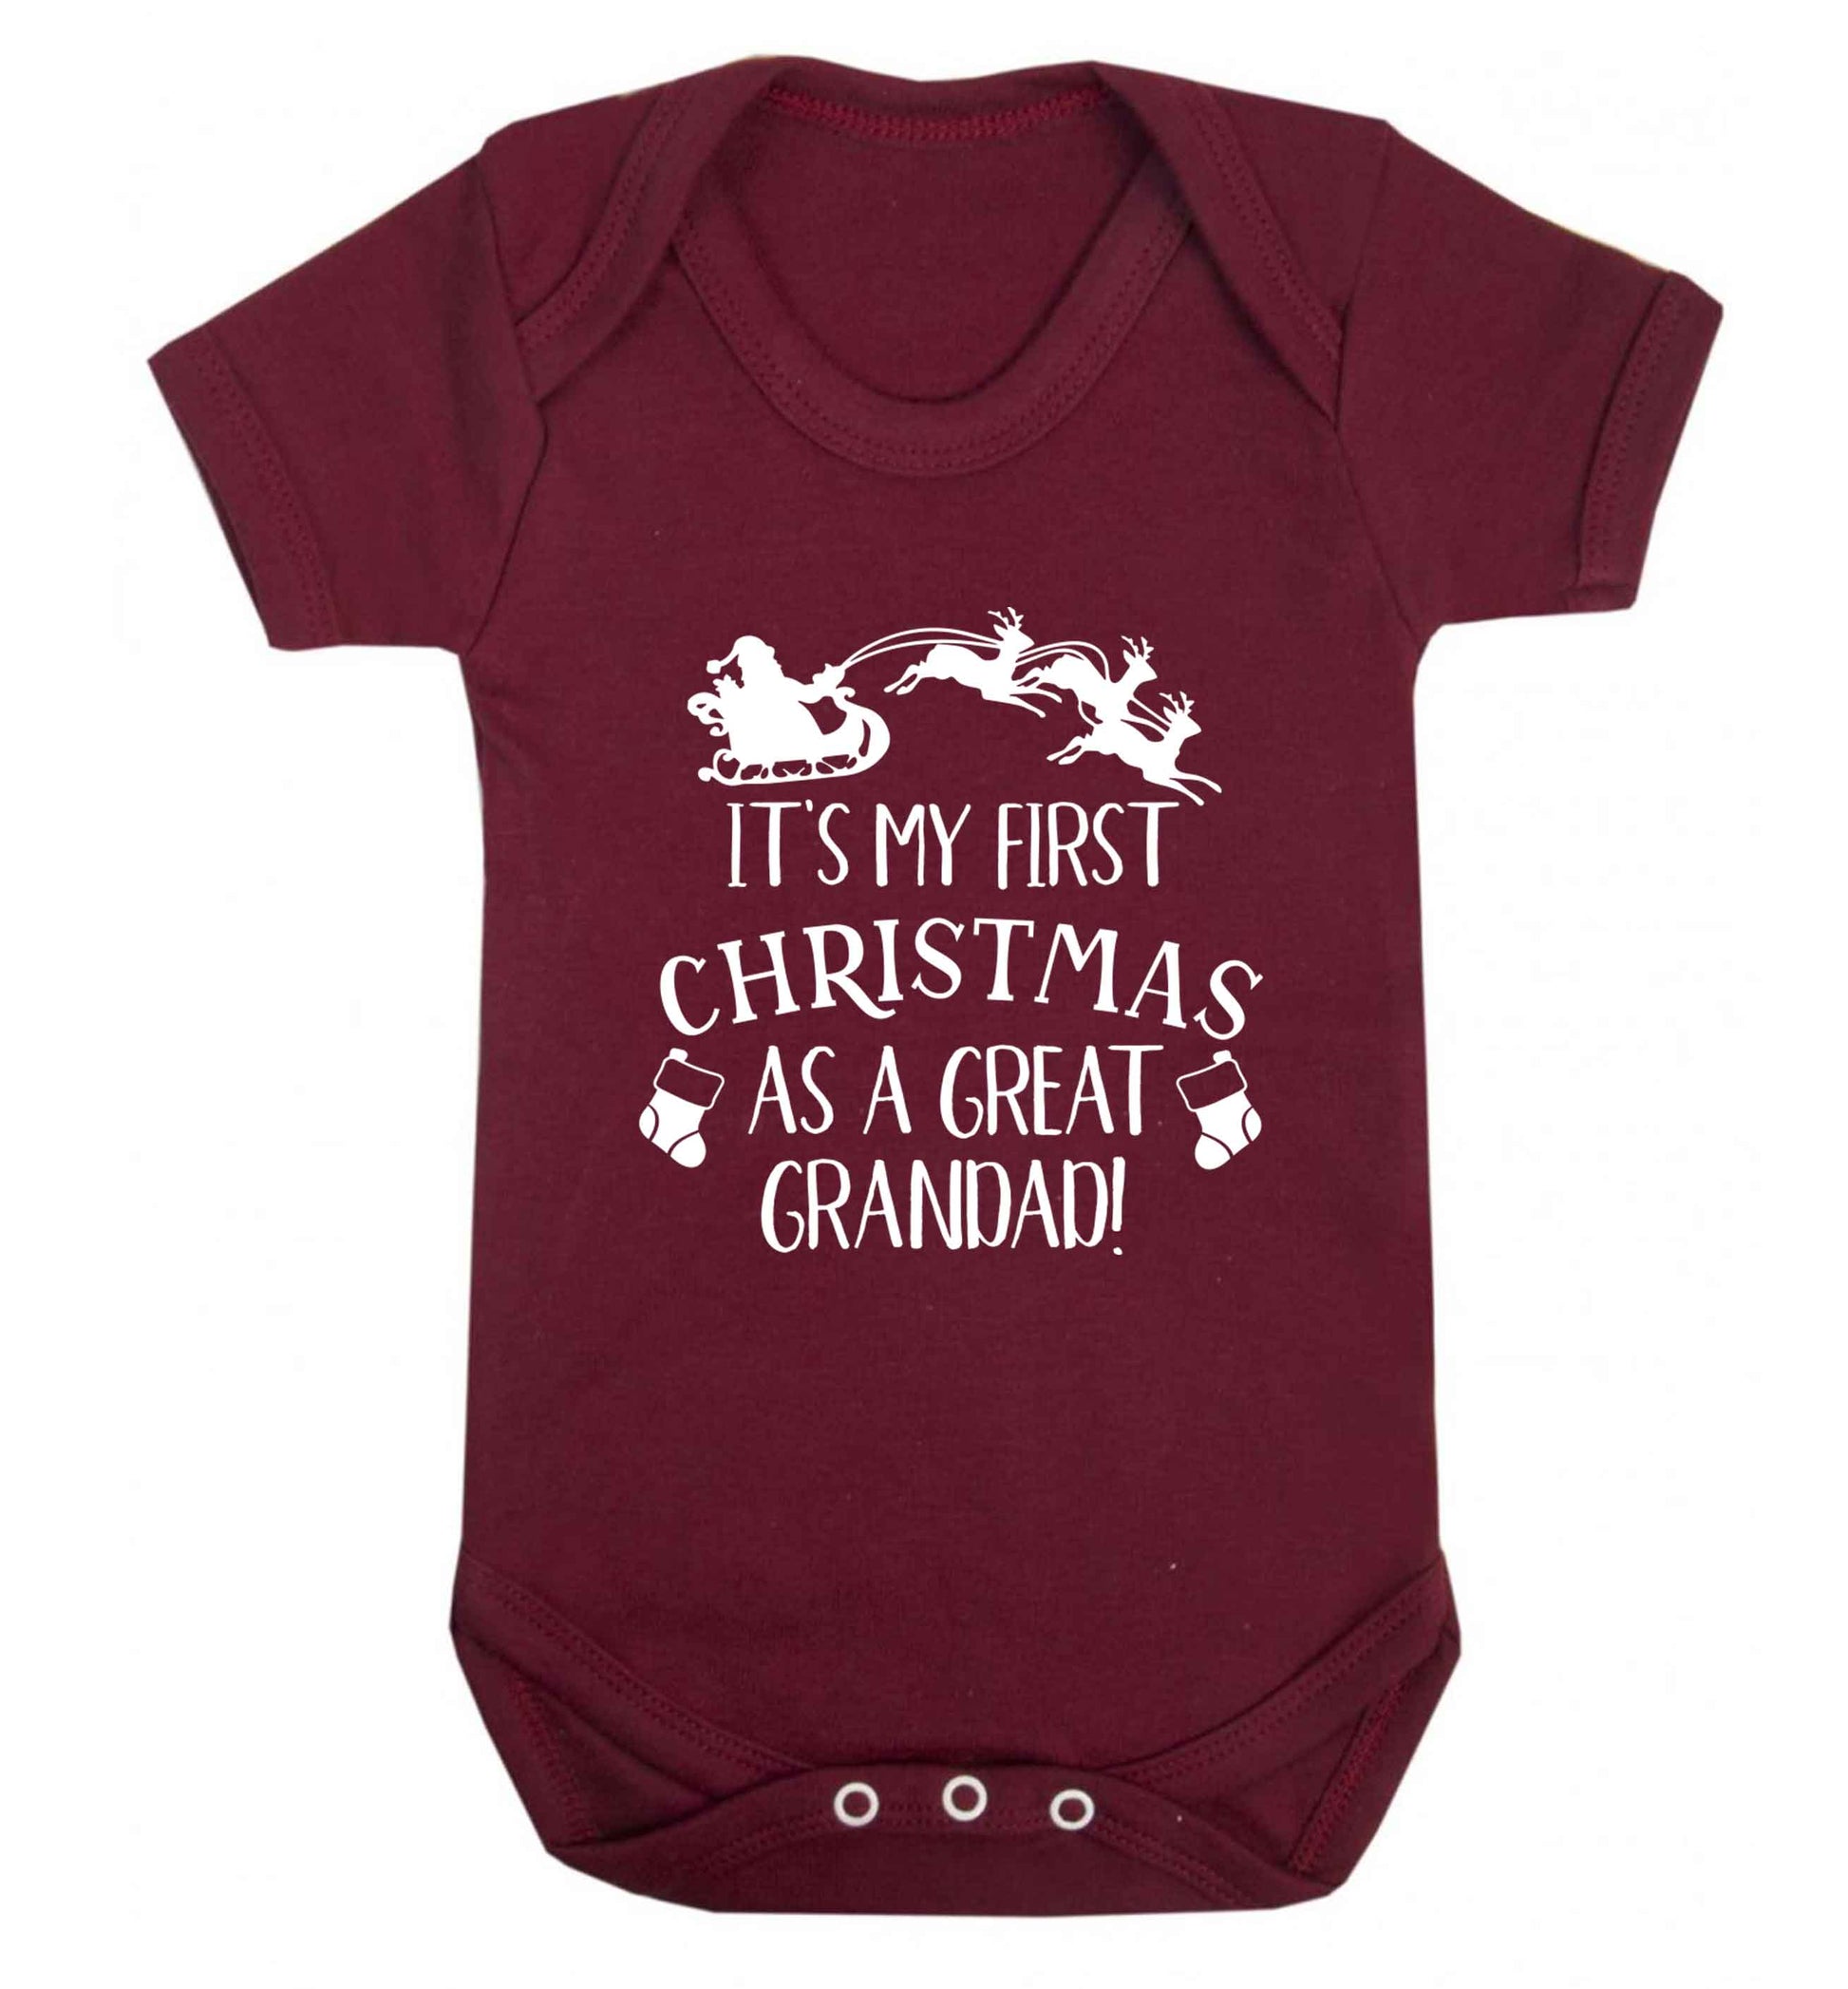 It's my first Christmas as a great grandad! Baby Vest maroon 18-24 months